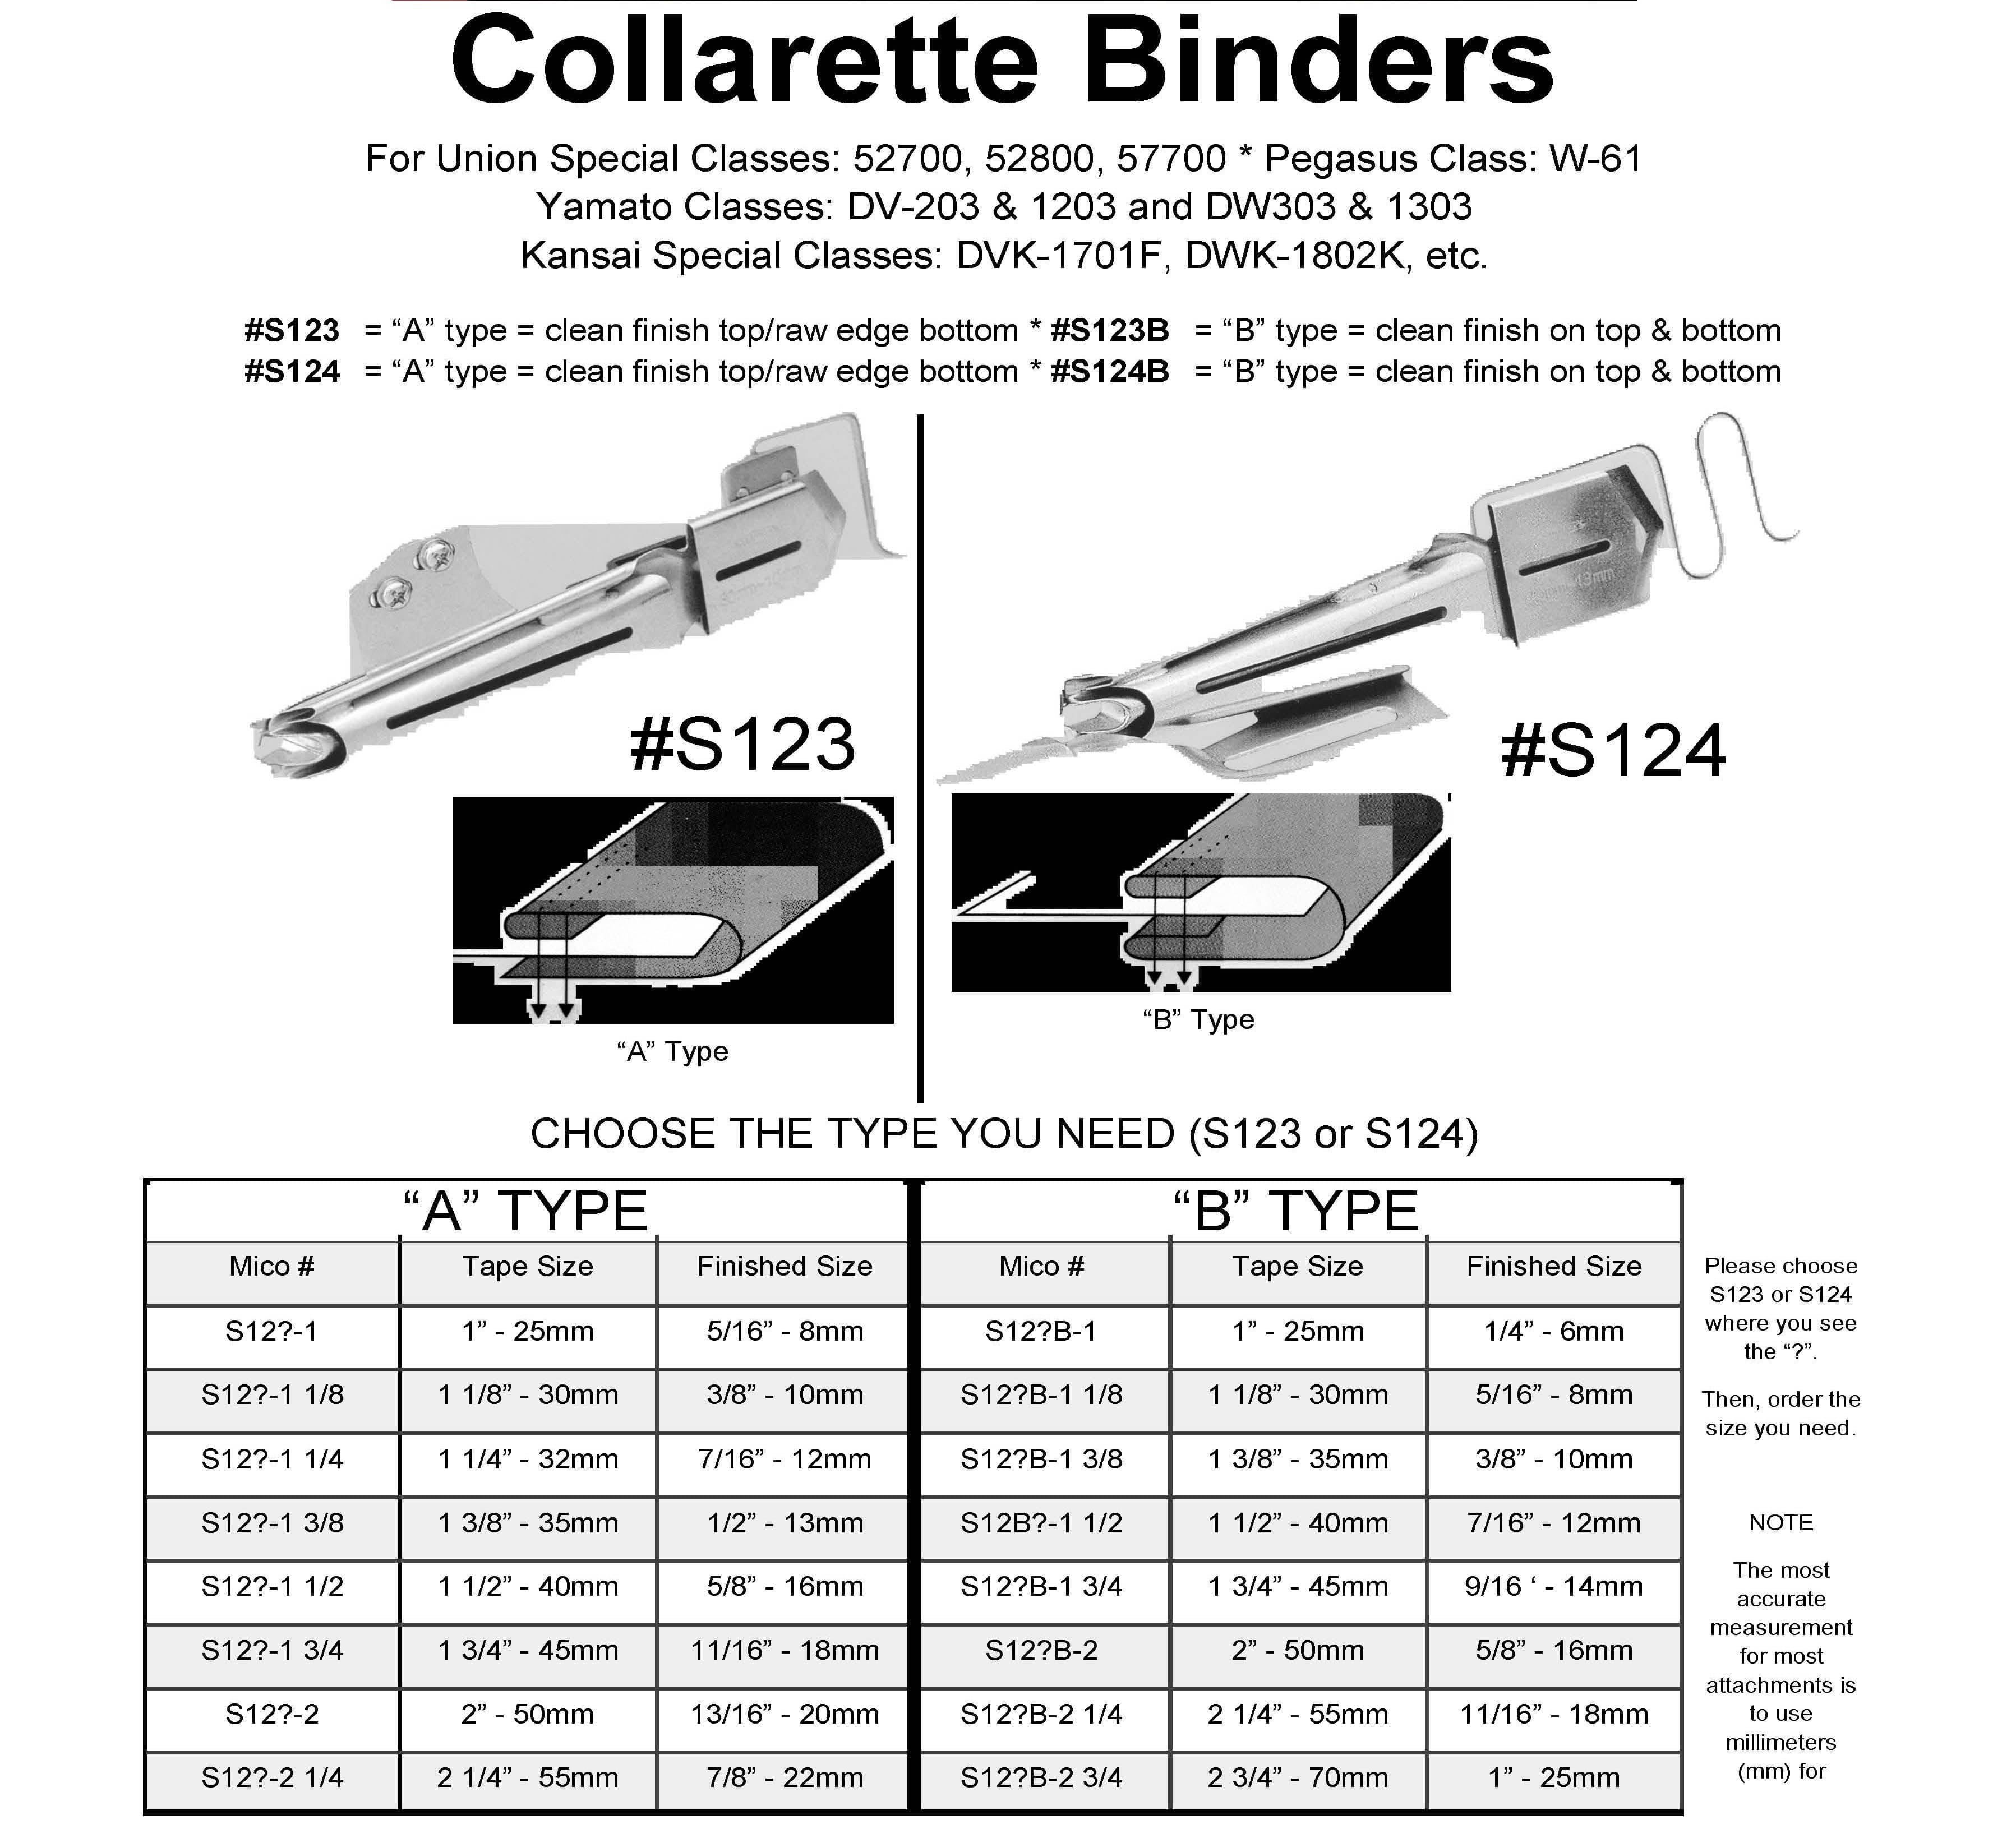 COLLARETTE BINDERS A & B TYPE
S123 and S124